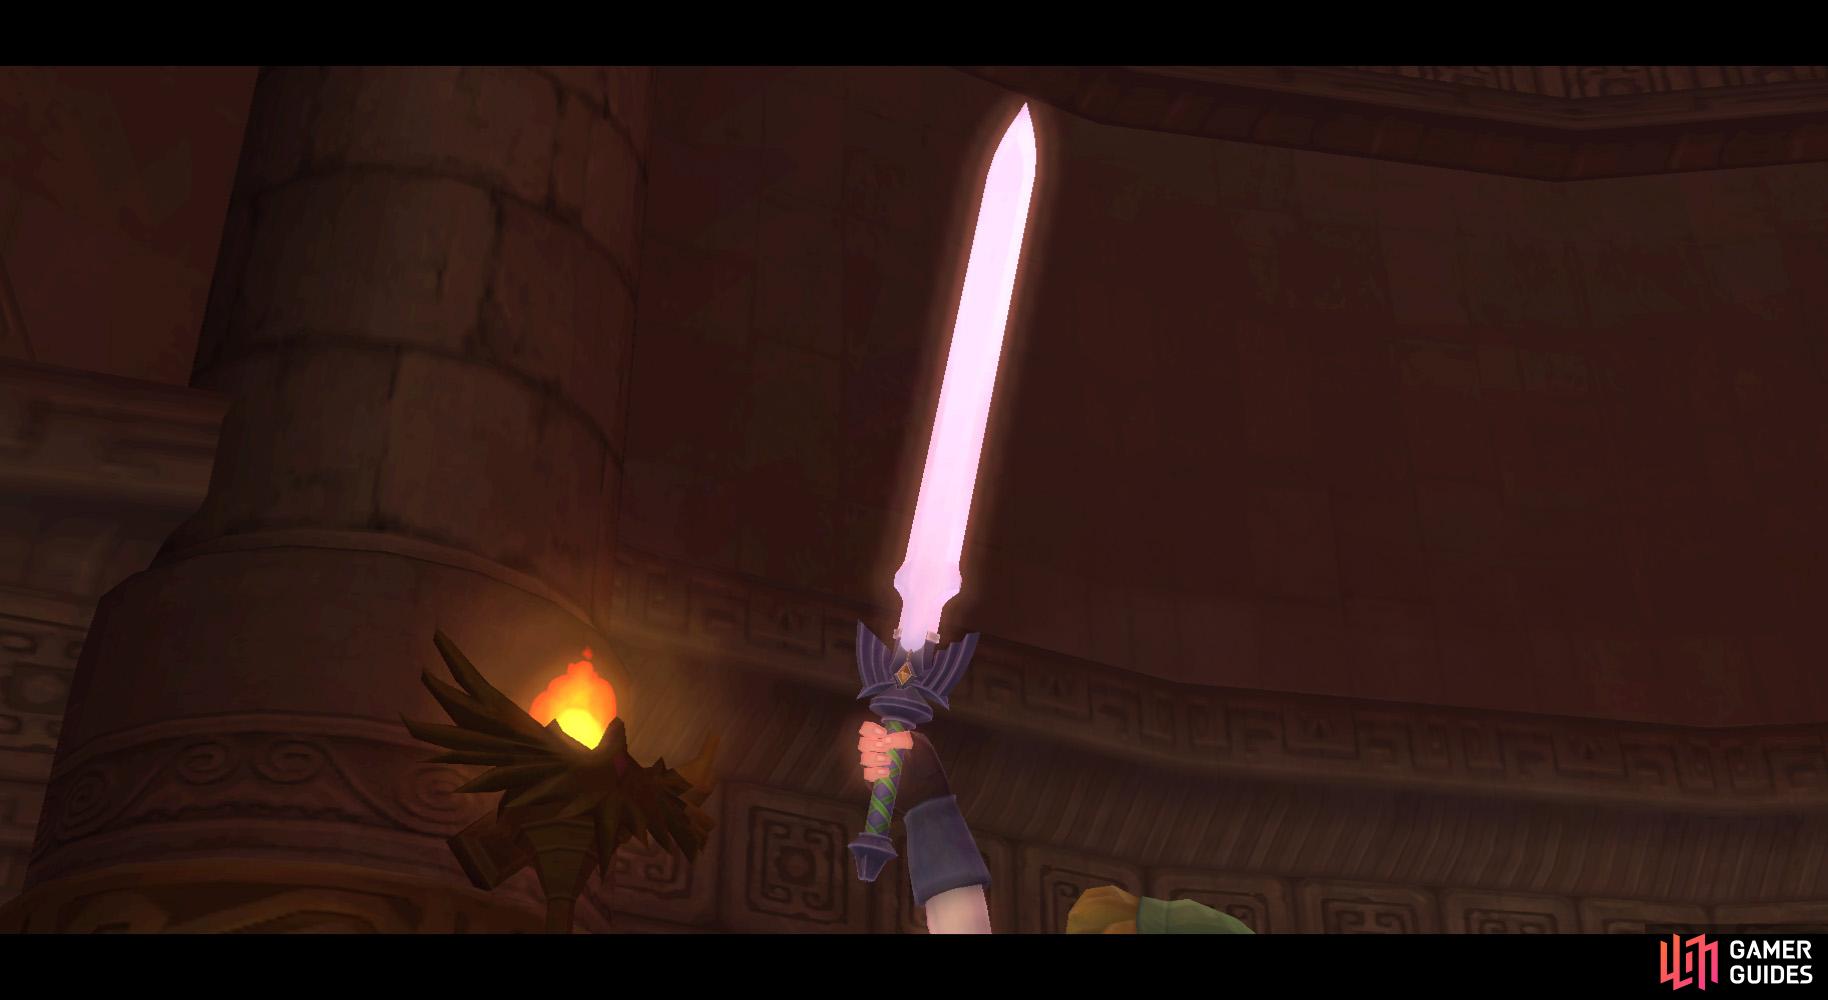 At long last, the legendary Master Sword is yours!